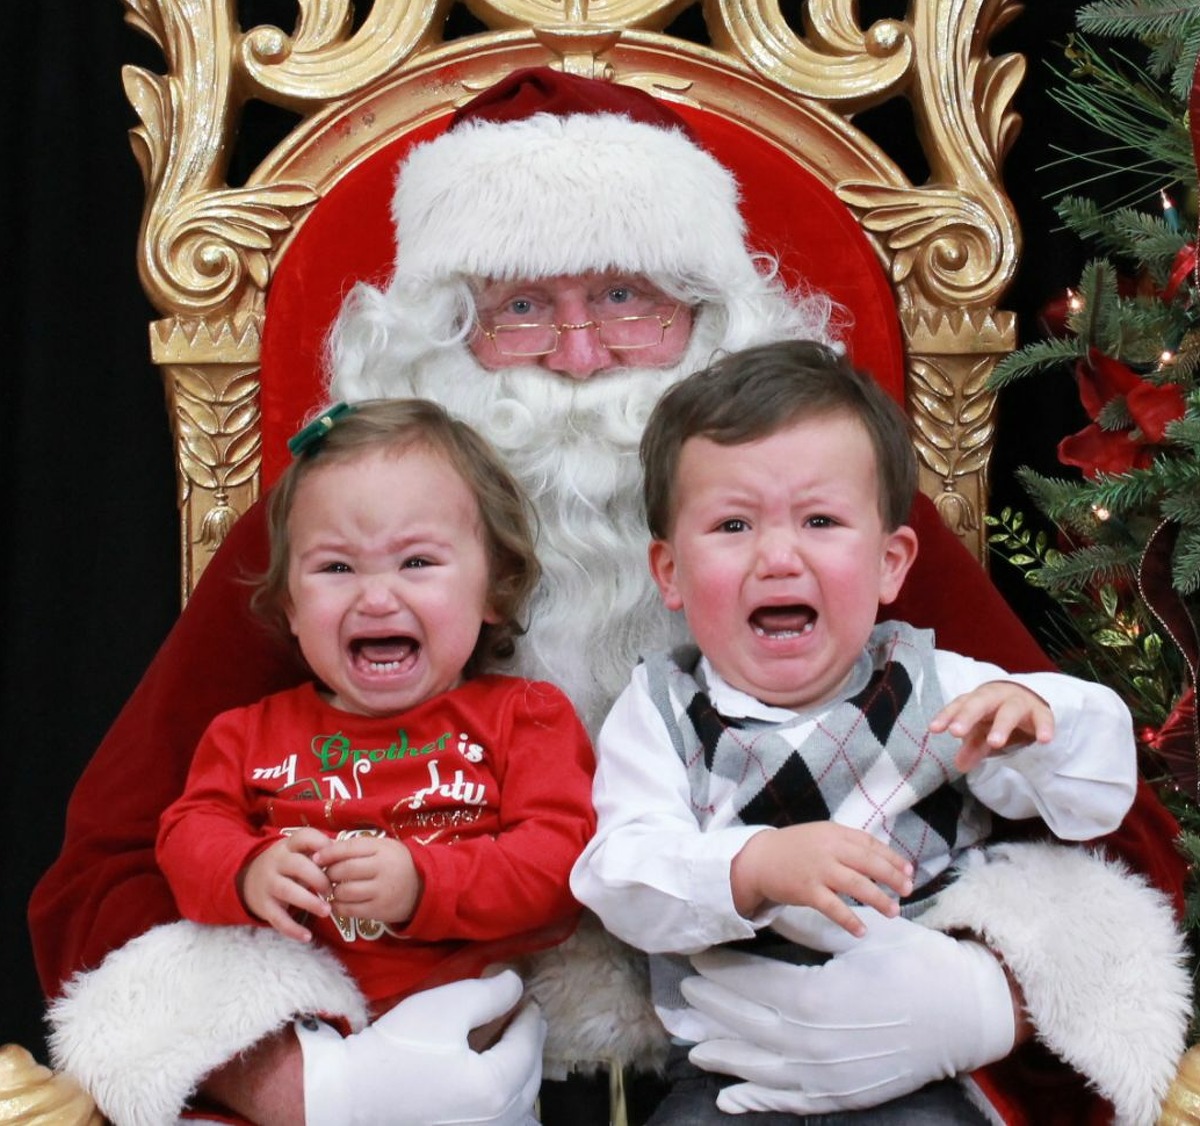 Adorable photos of children screaming and crying with Santa